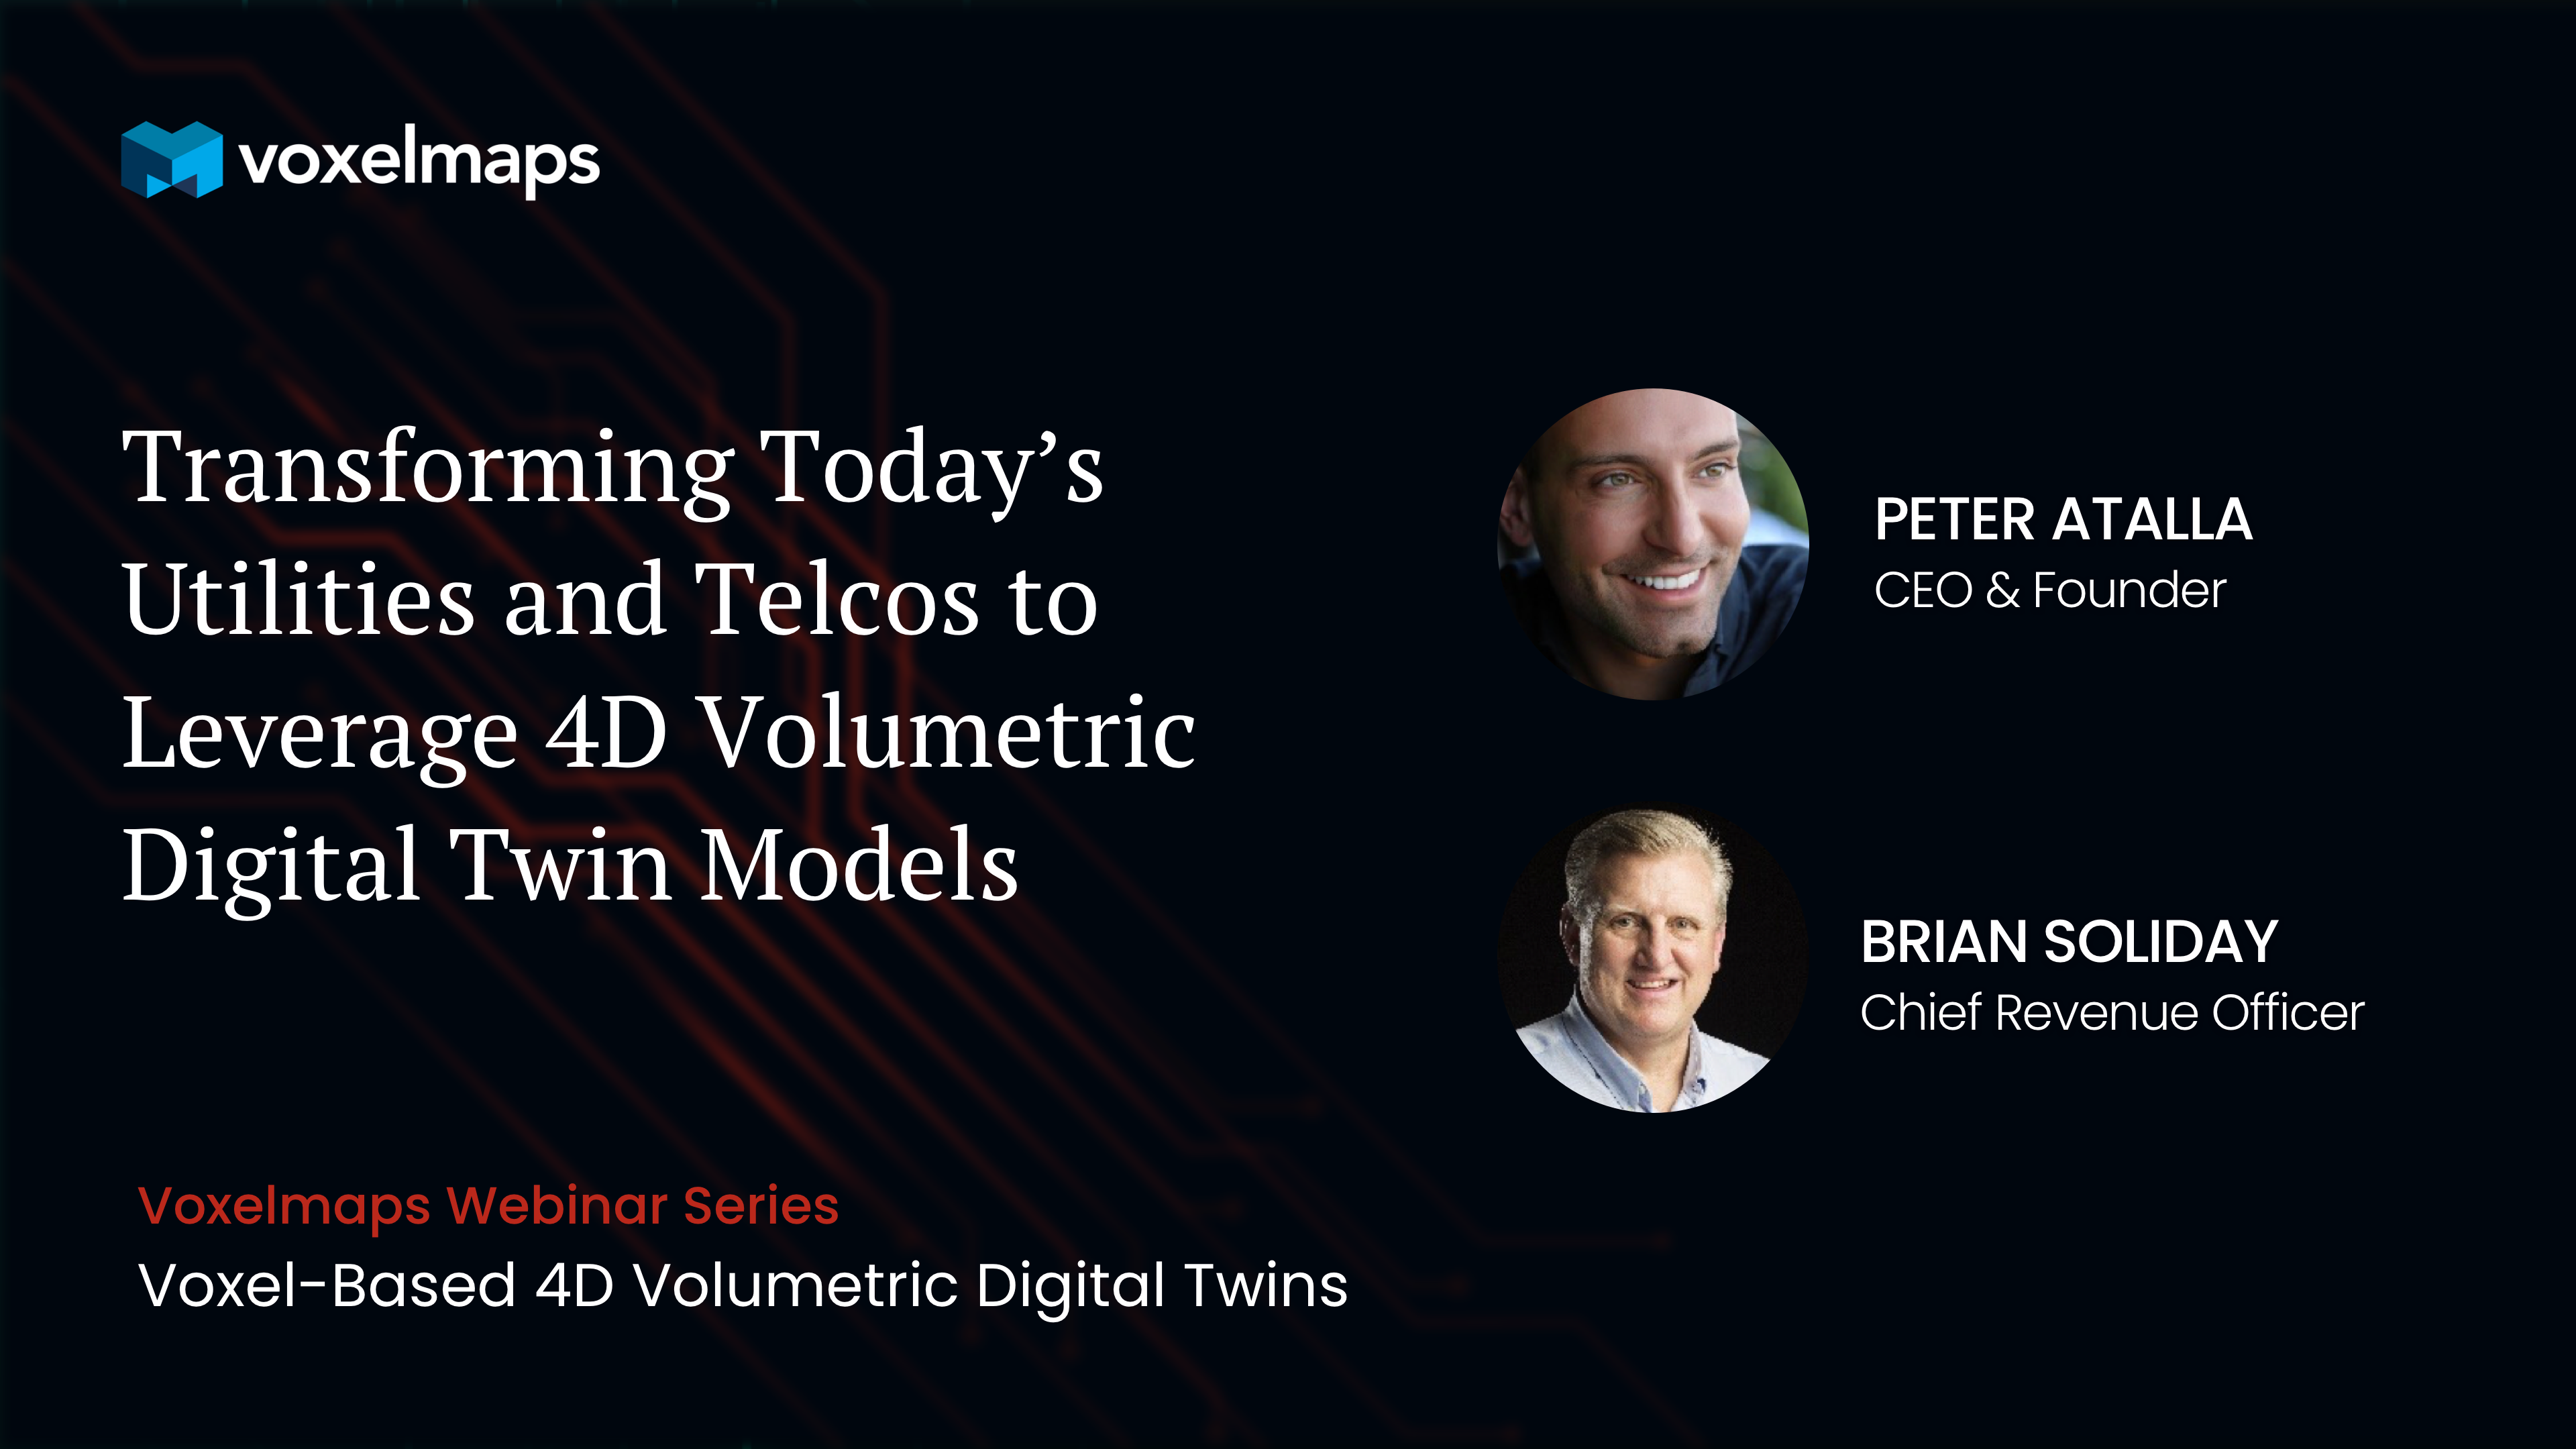 Transforming Today’s Utilities and Telcos to Leverage 4D Volumetric Digital Twin Models